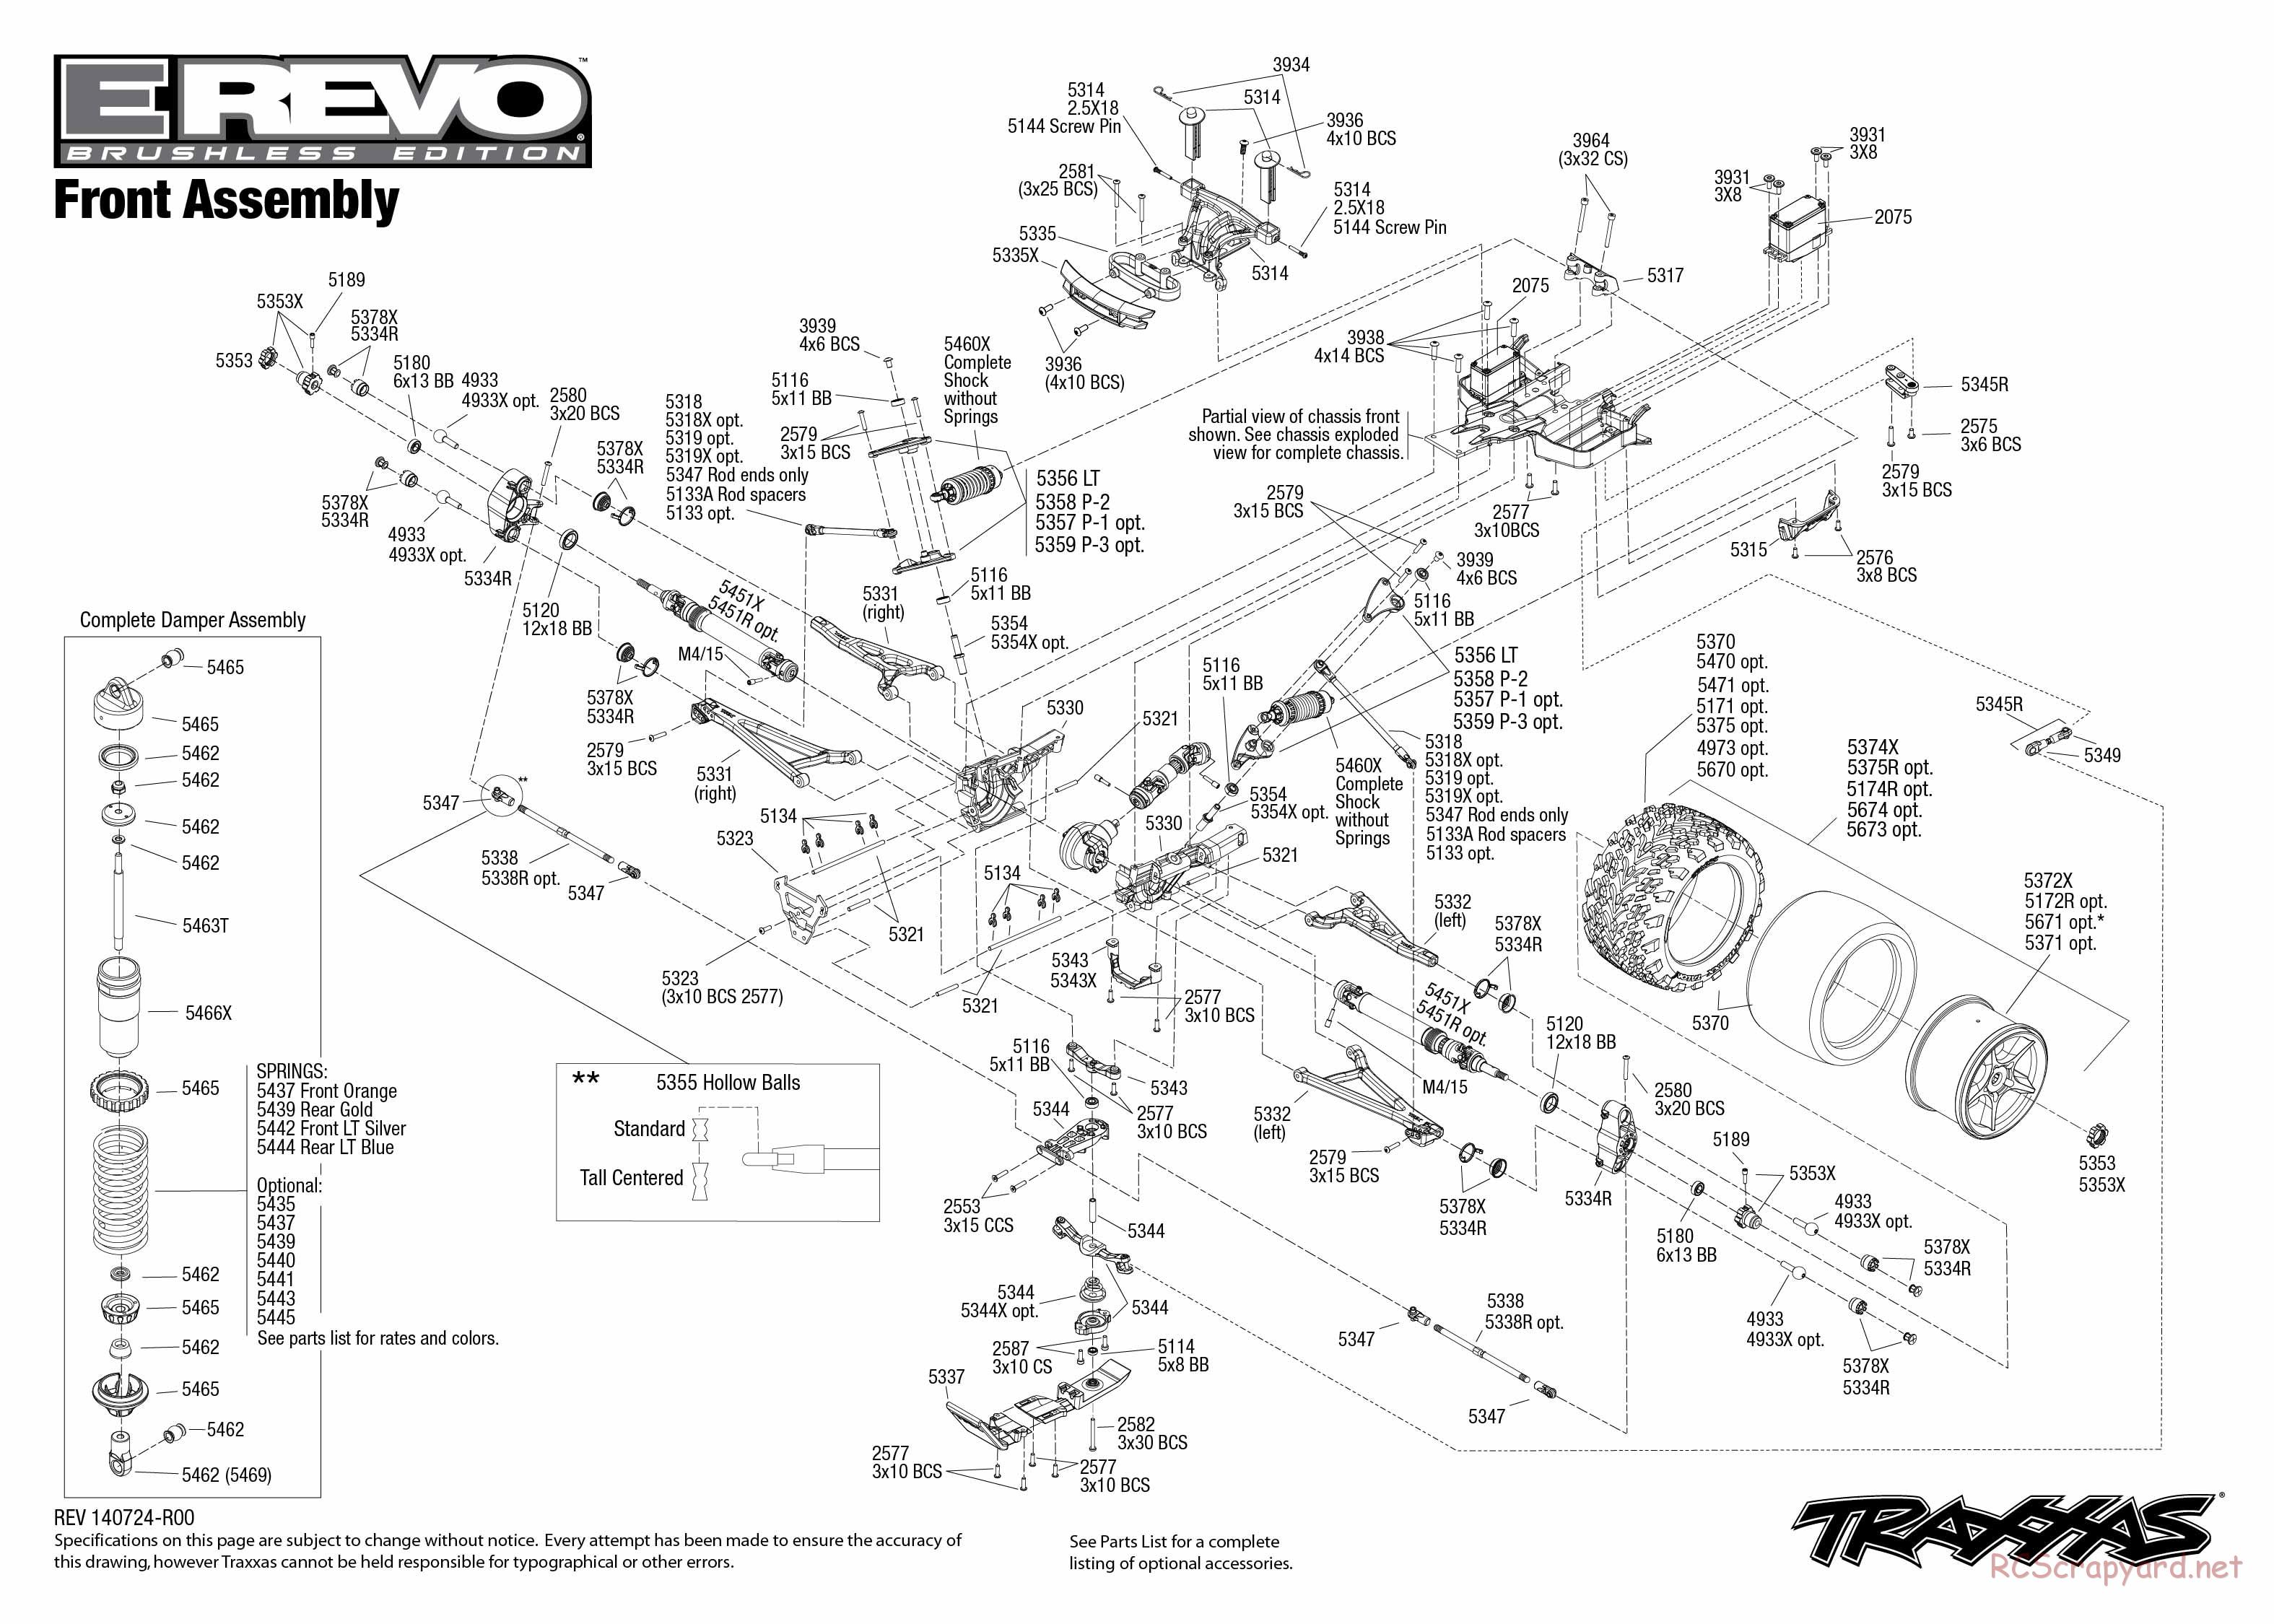 Traxxas - E-Revo Brushless (2015) - Exploded Views - Page 3